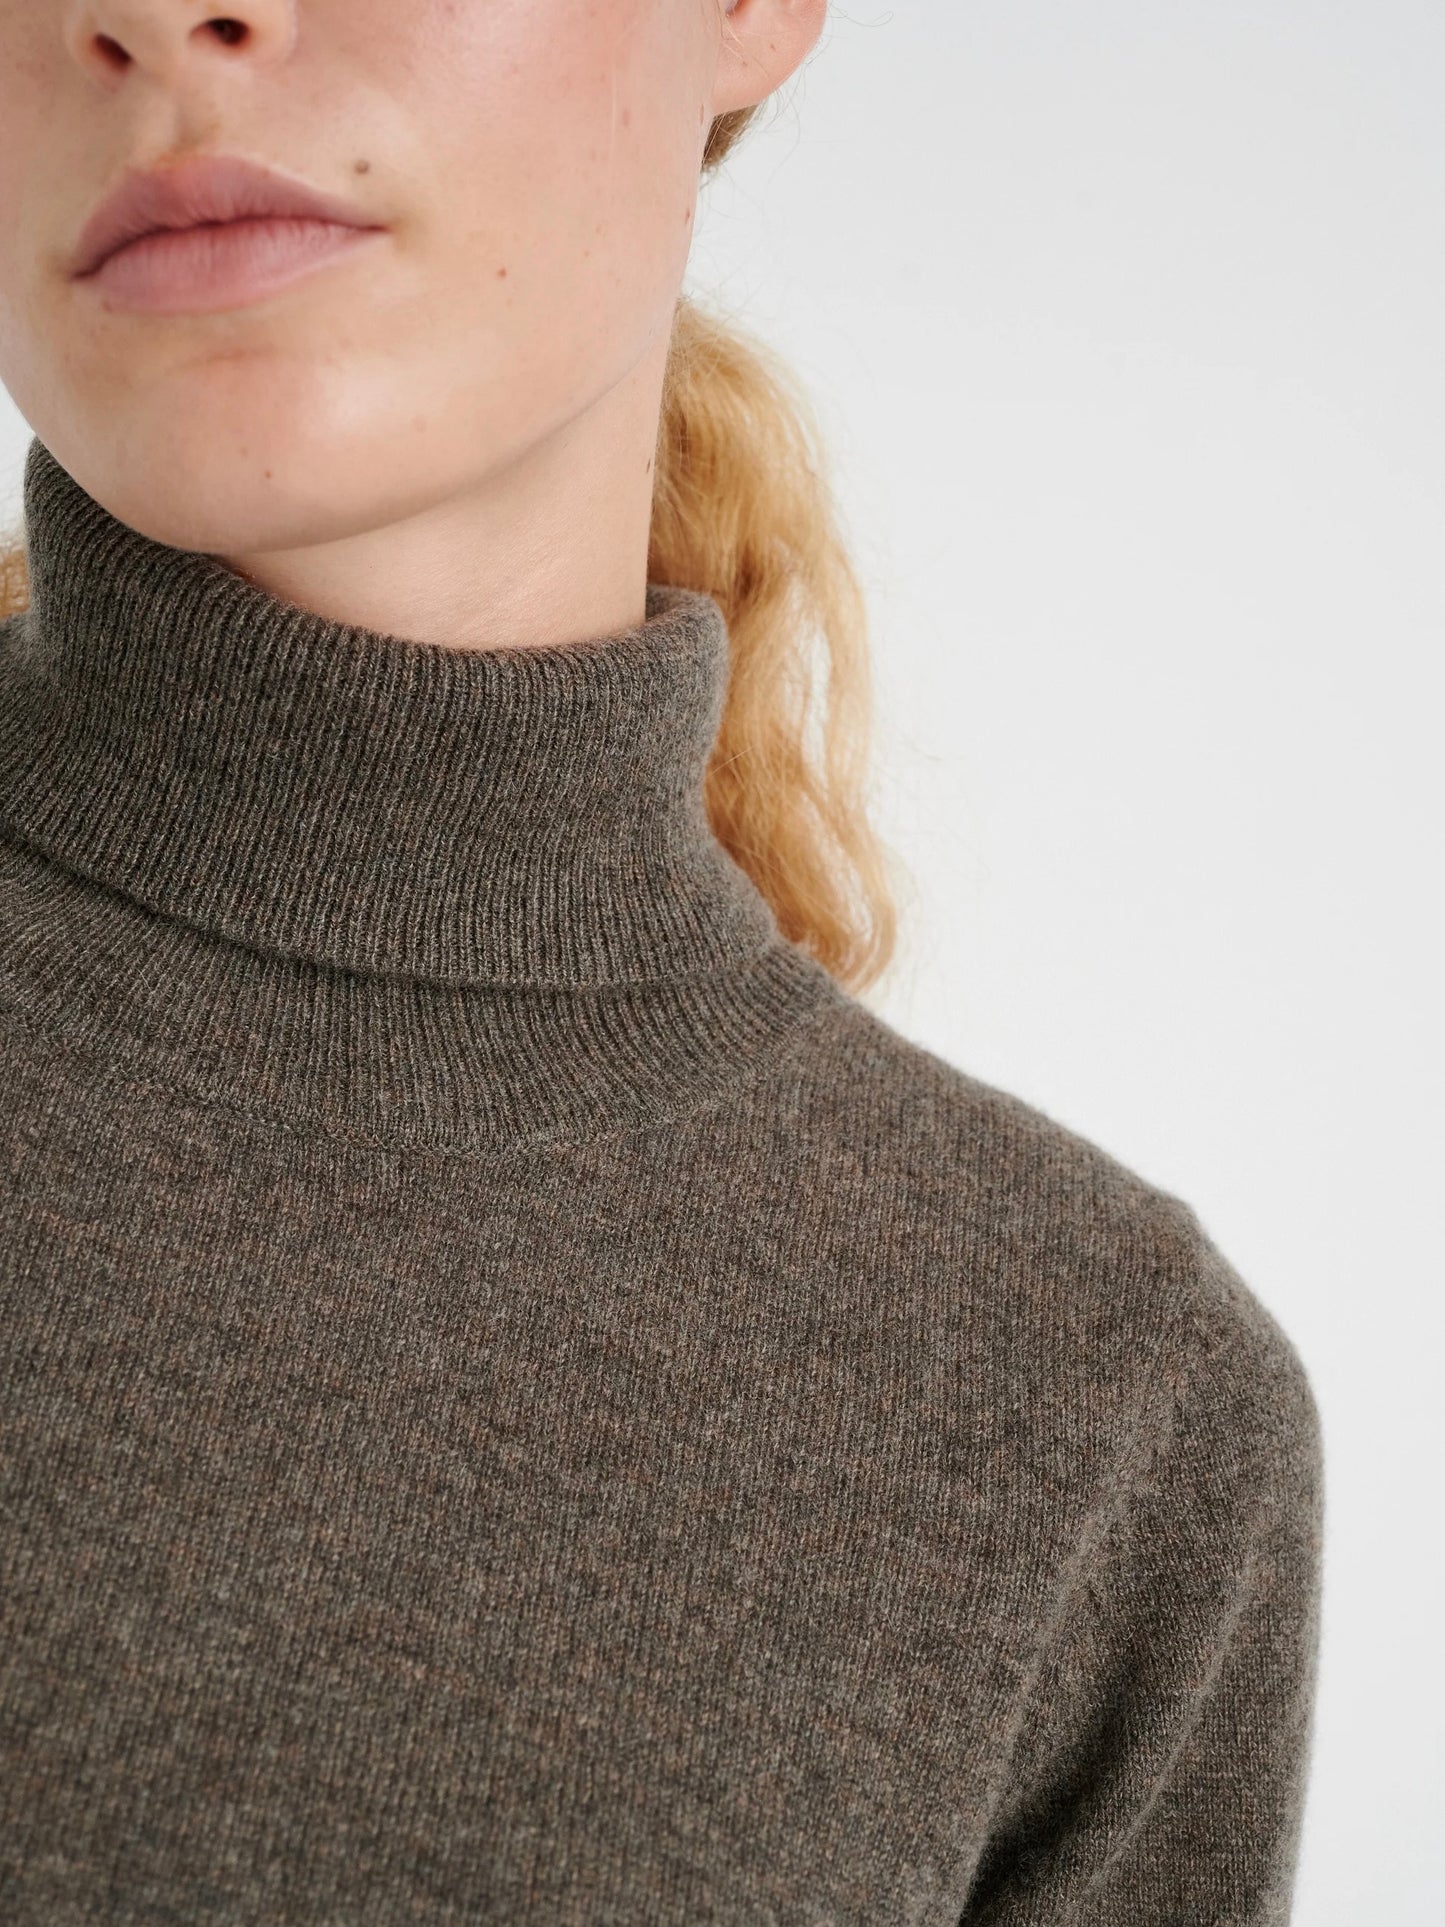 Cashmere Pullover Lukka Roll Neck dunkles taupe